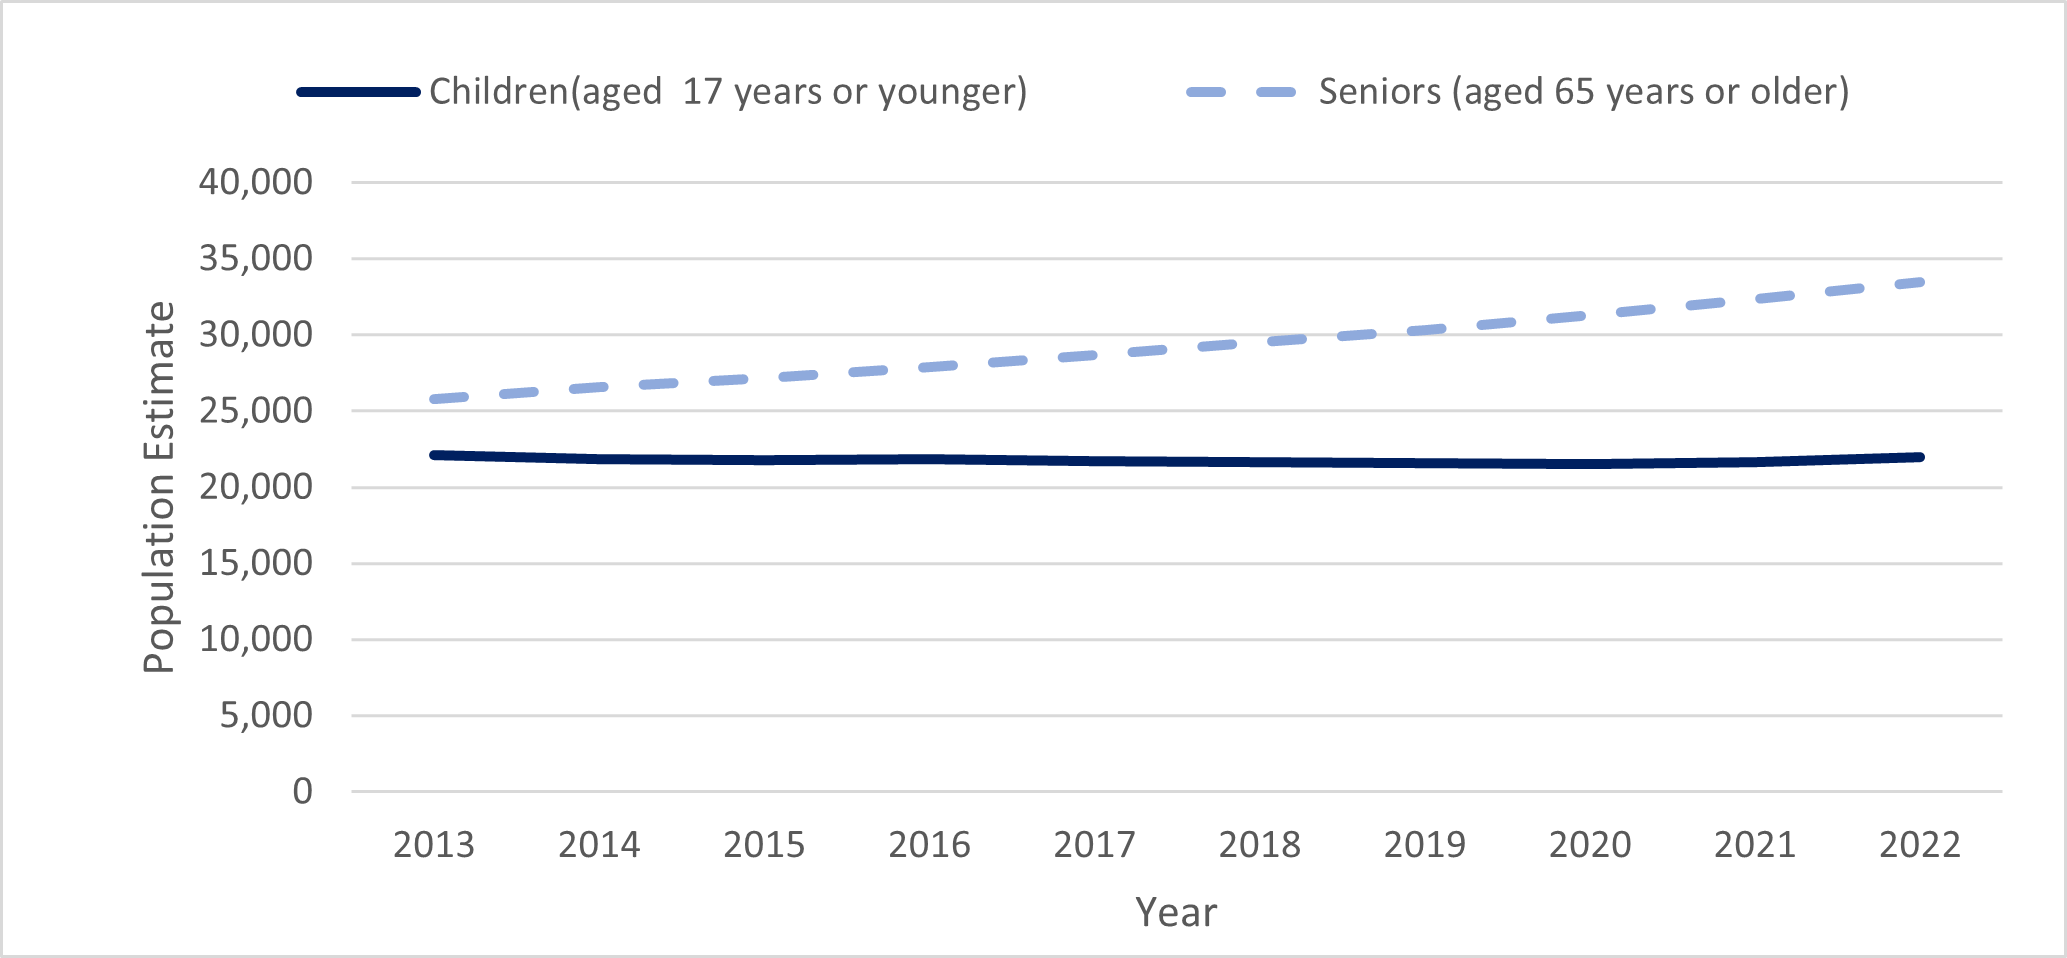 Graph showing the population estimates for children and seniors by year